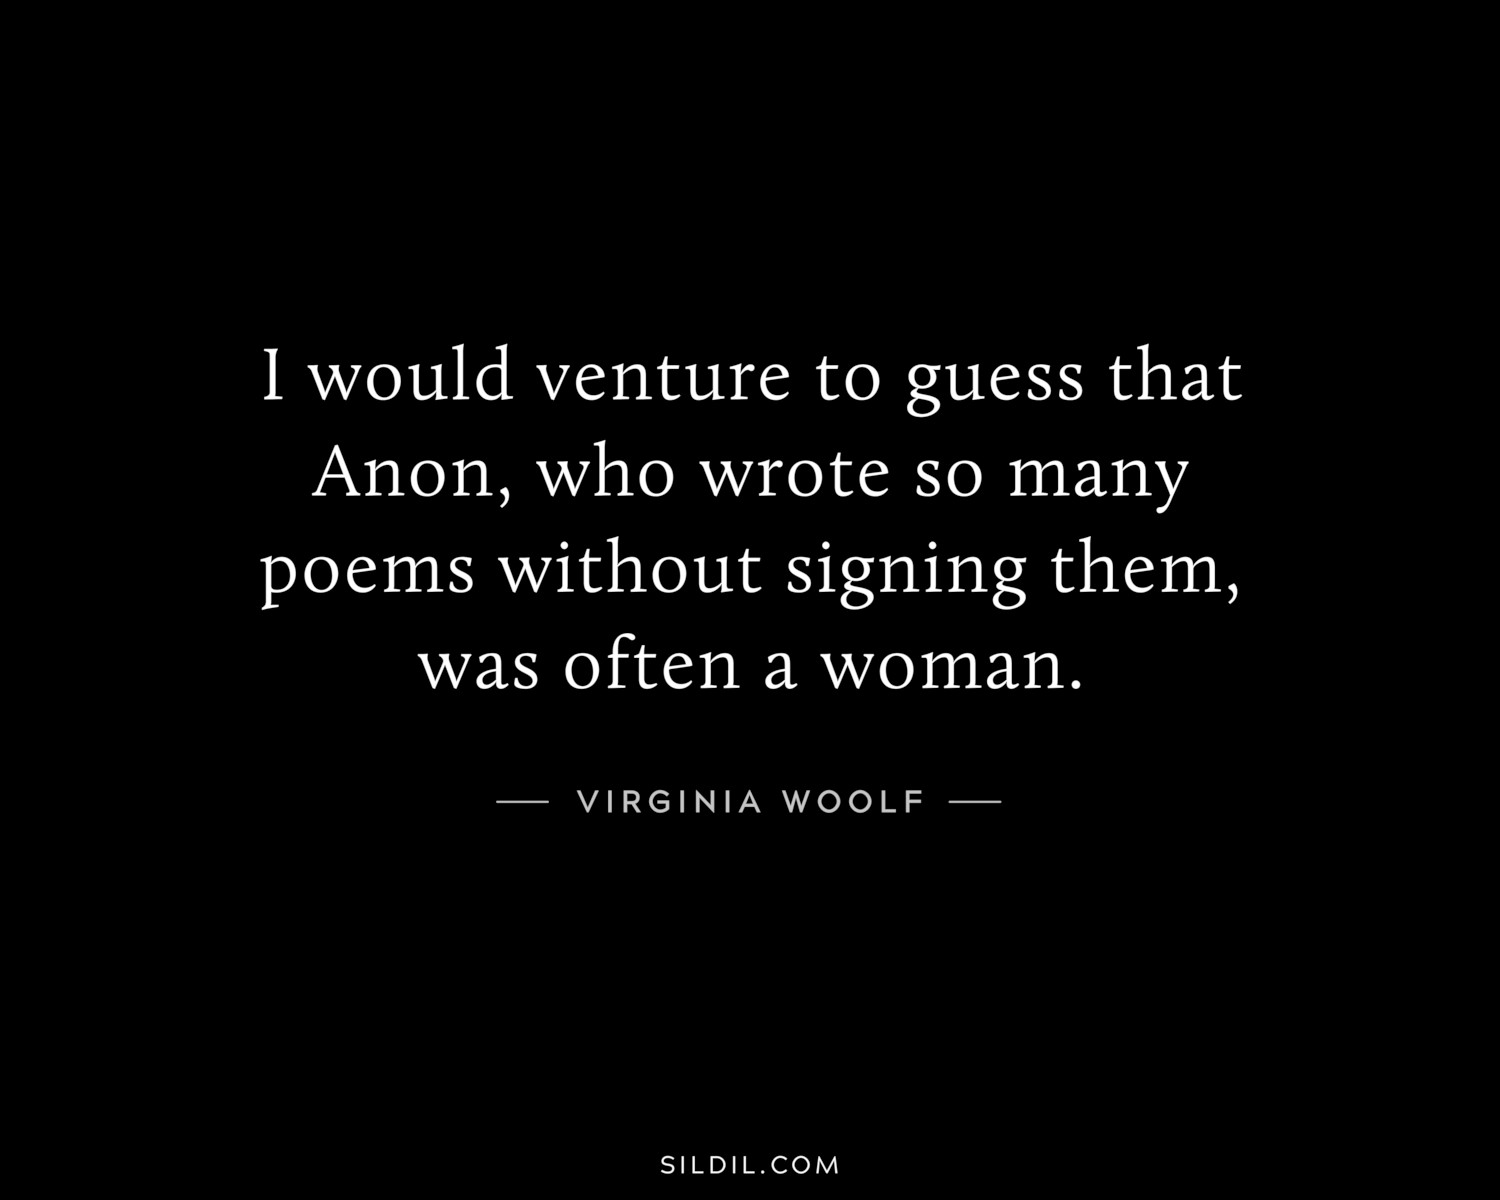 I would venture to guess that Anon, who wrote so many poems without signing them, was often a woman.